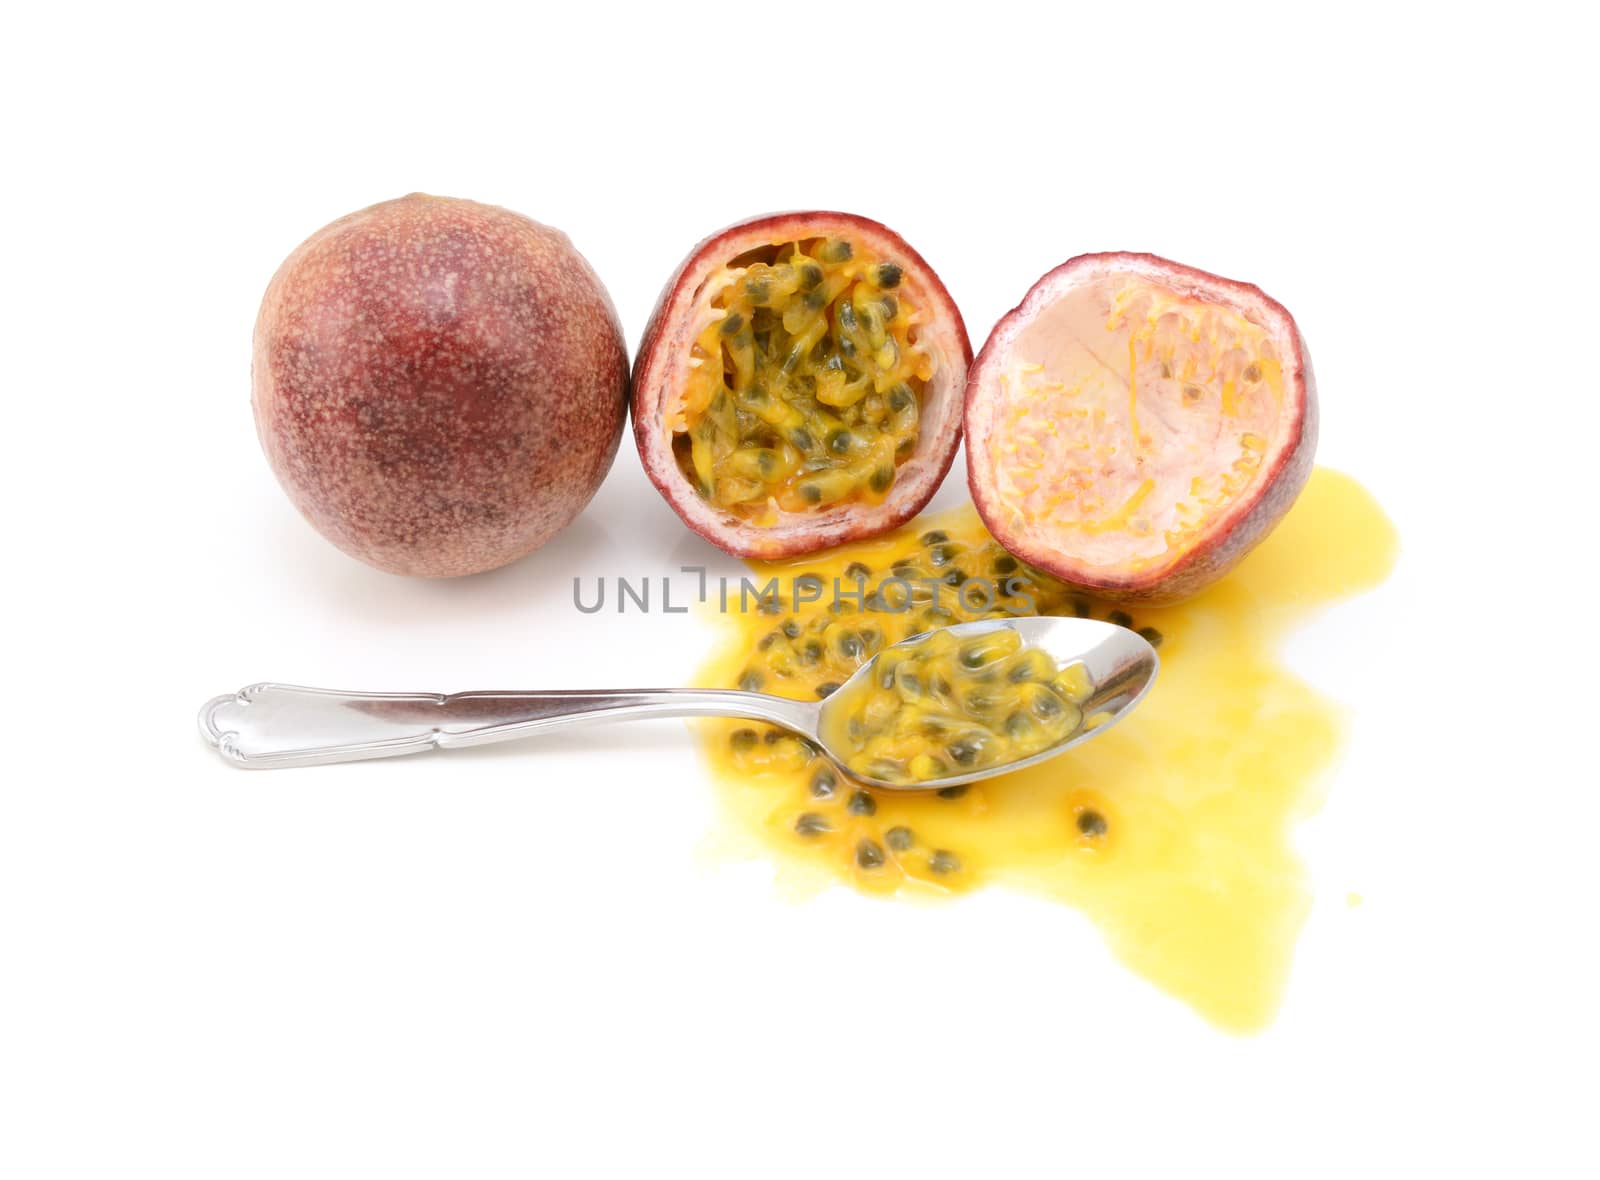 Whole and halved passion fruits ready to eat with a spoon by sarahdoow